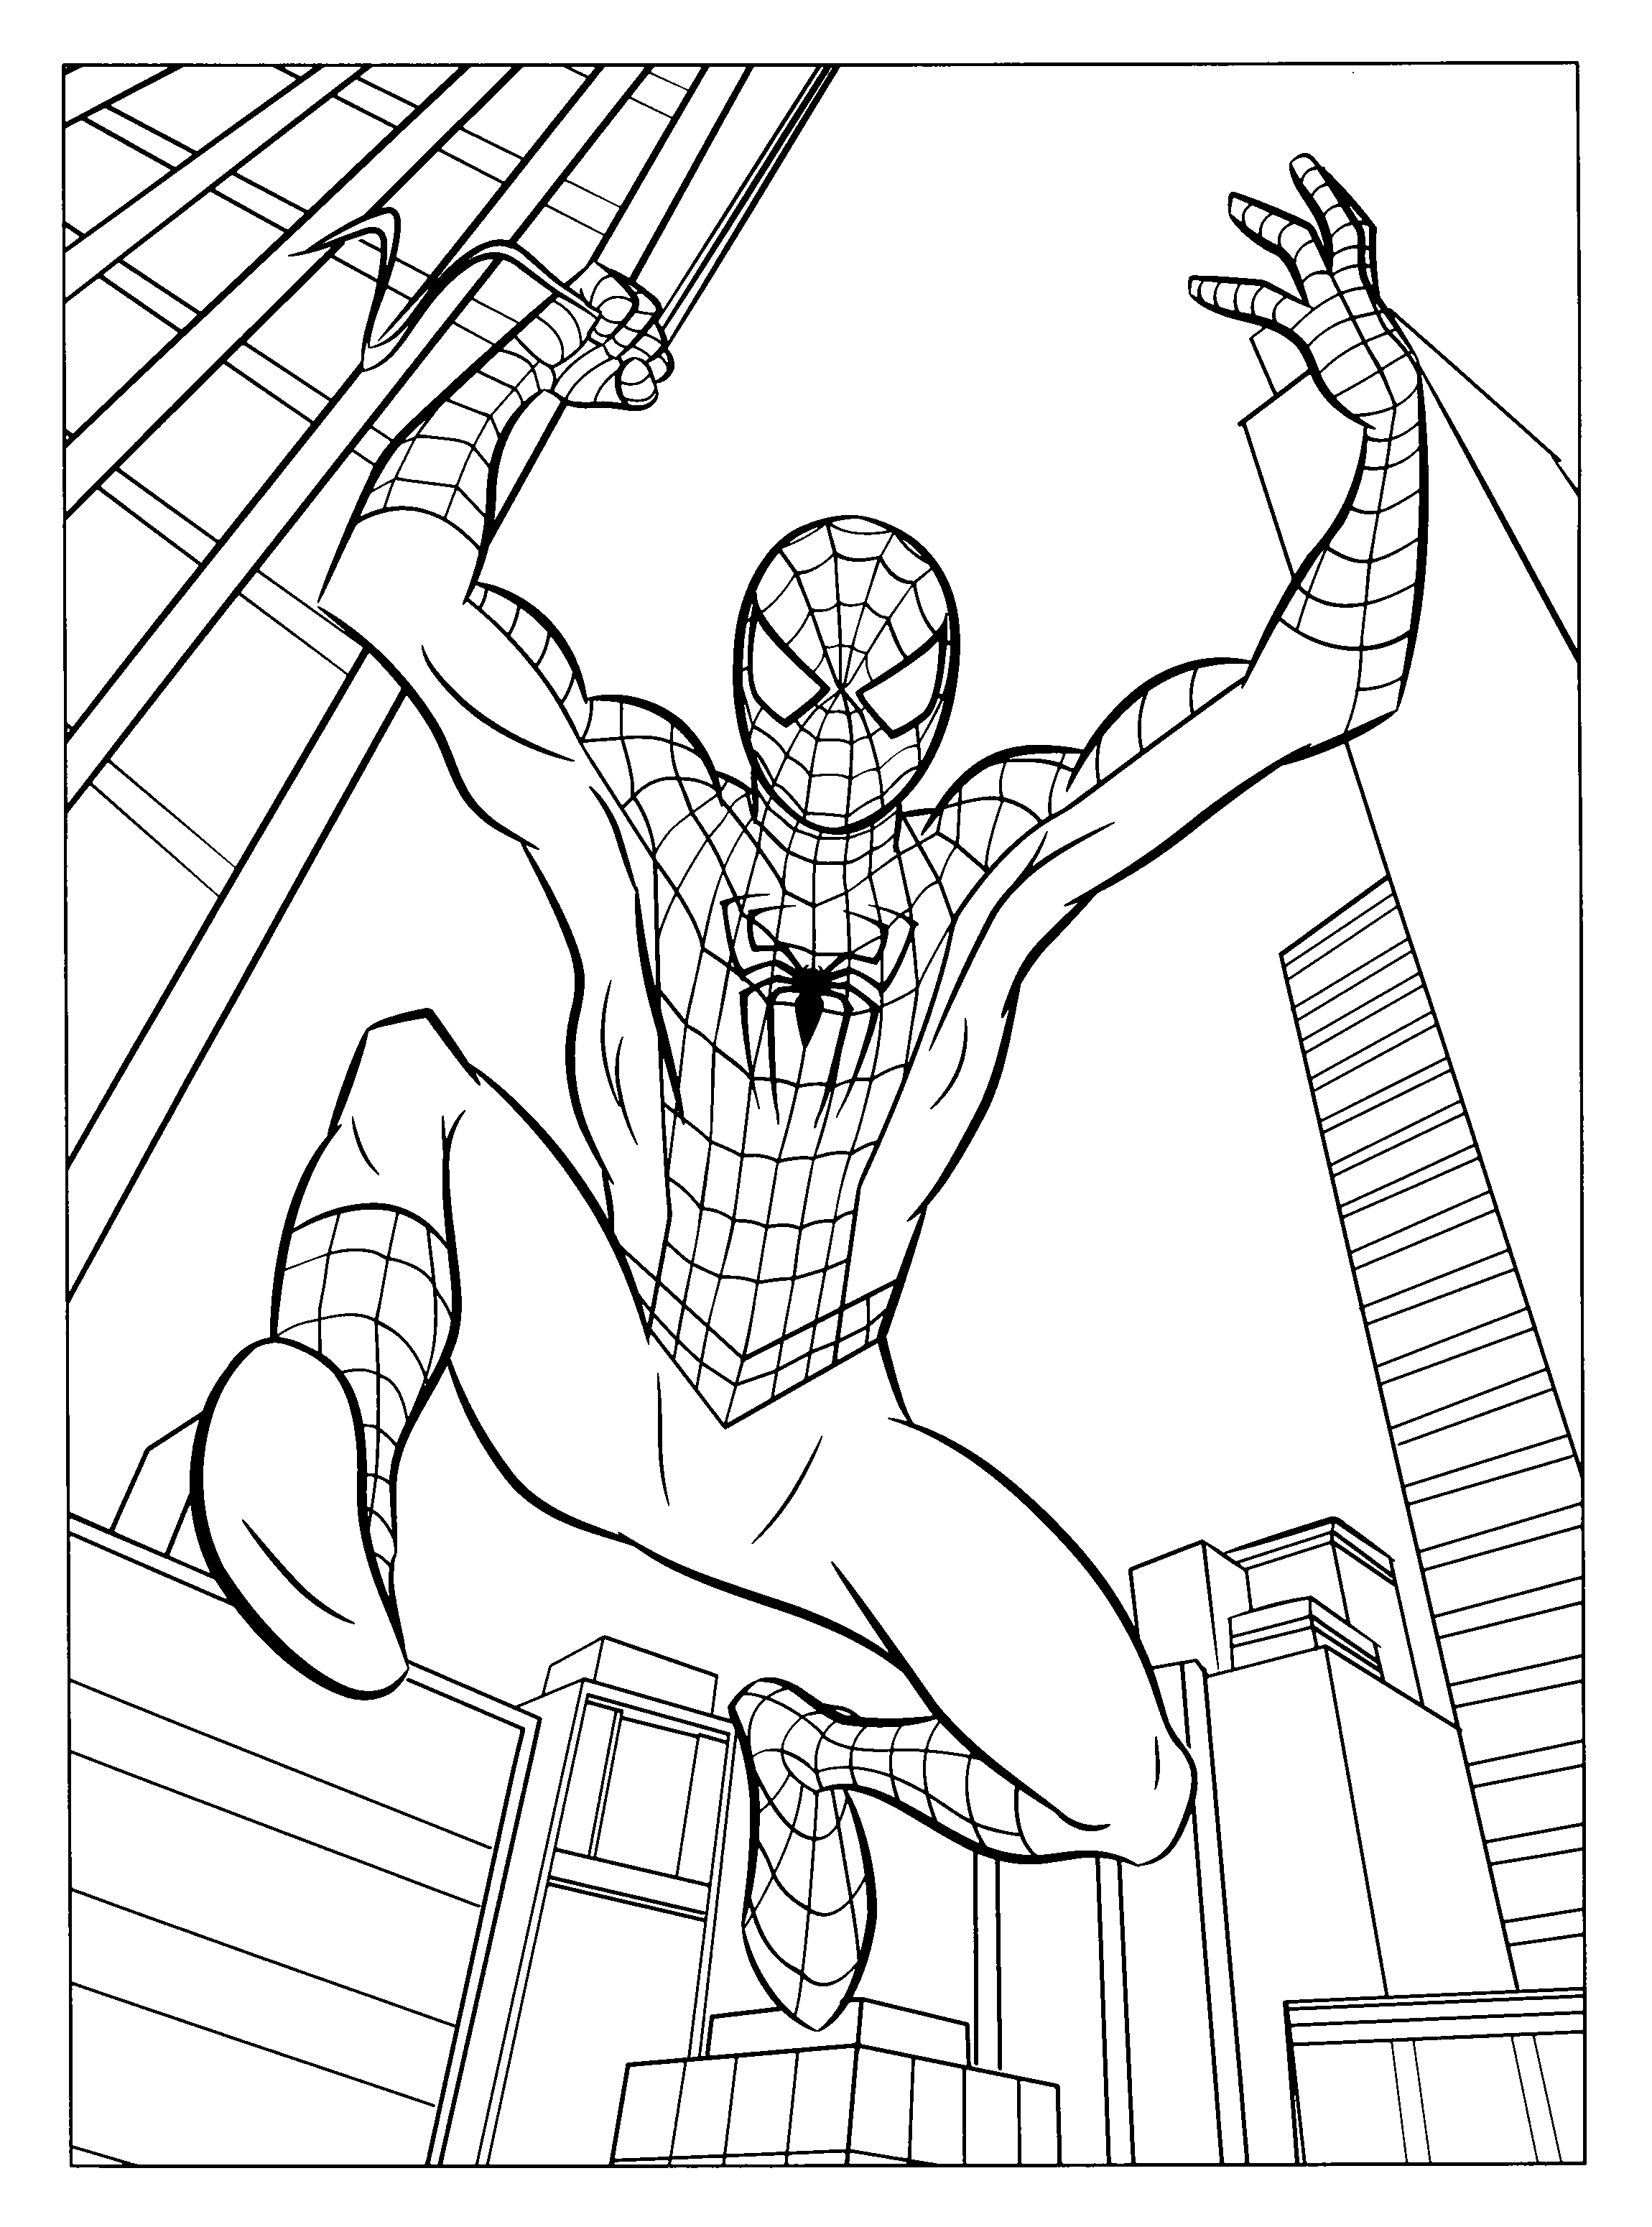 Download Spiderman for kids - Spiderman Kids Coloring Pages